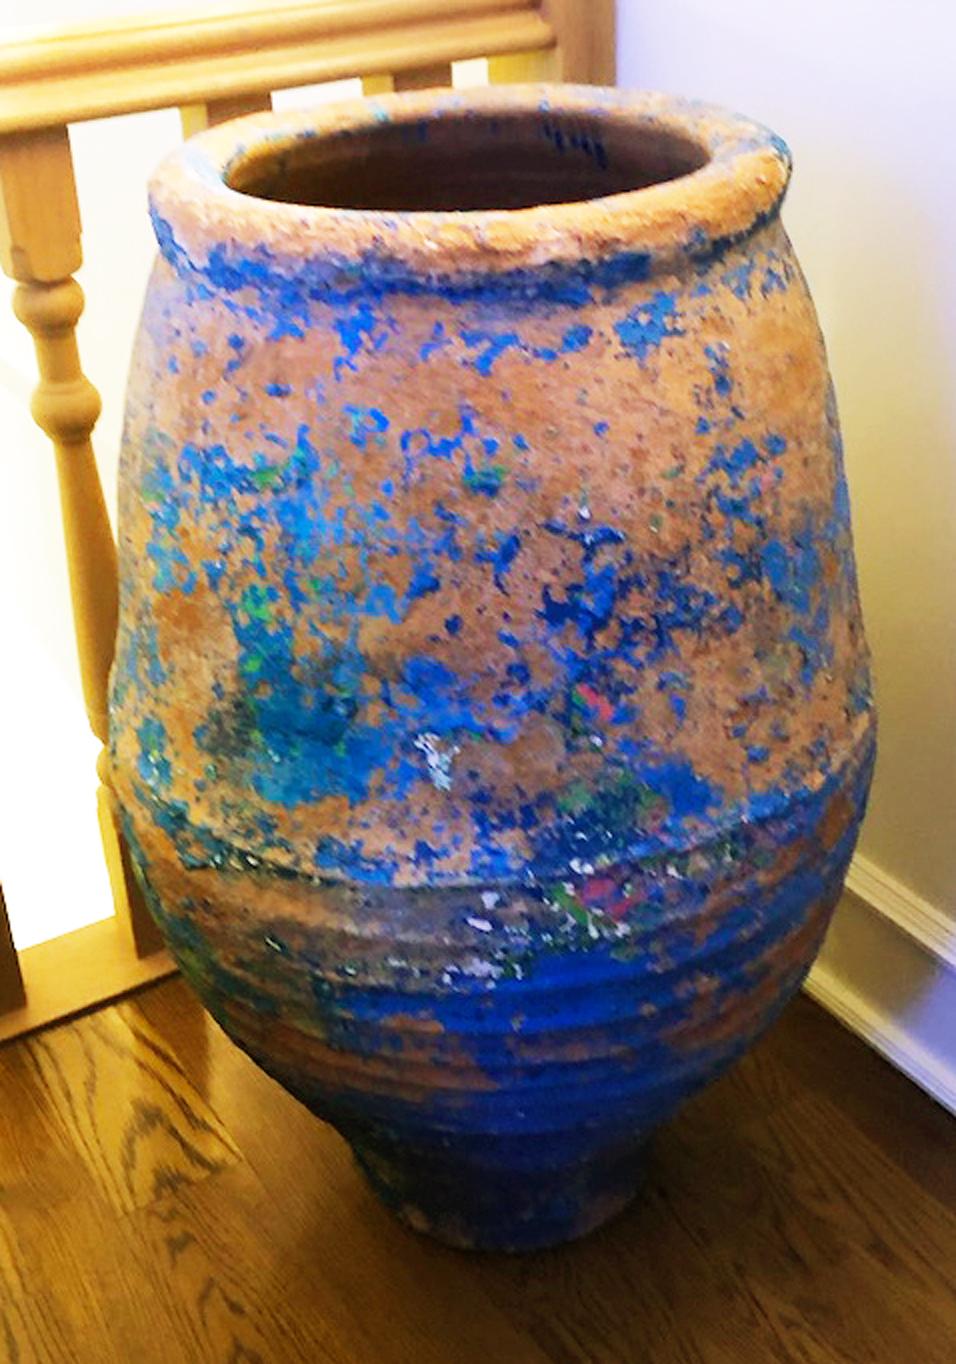 Large 19th-Century Mediterranean Olive Oil Jar Made in Terracotta & Indigo Glaze In Distressed Condition For Sale In Culver City, CA